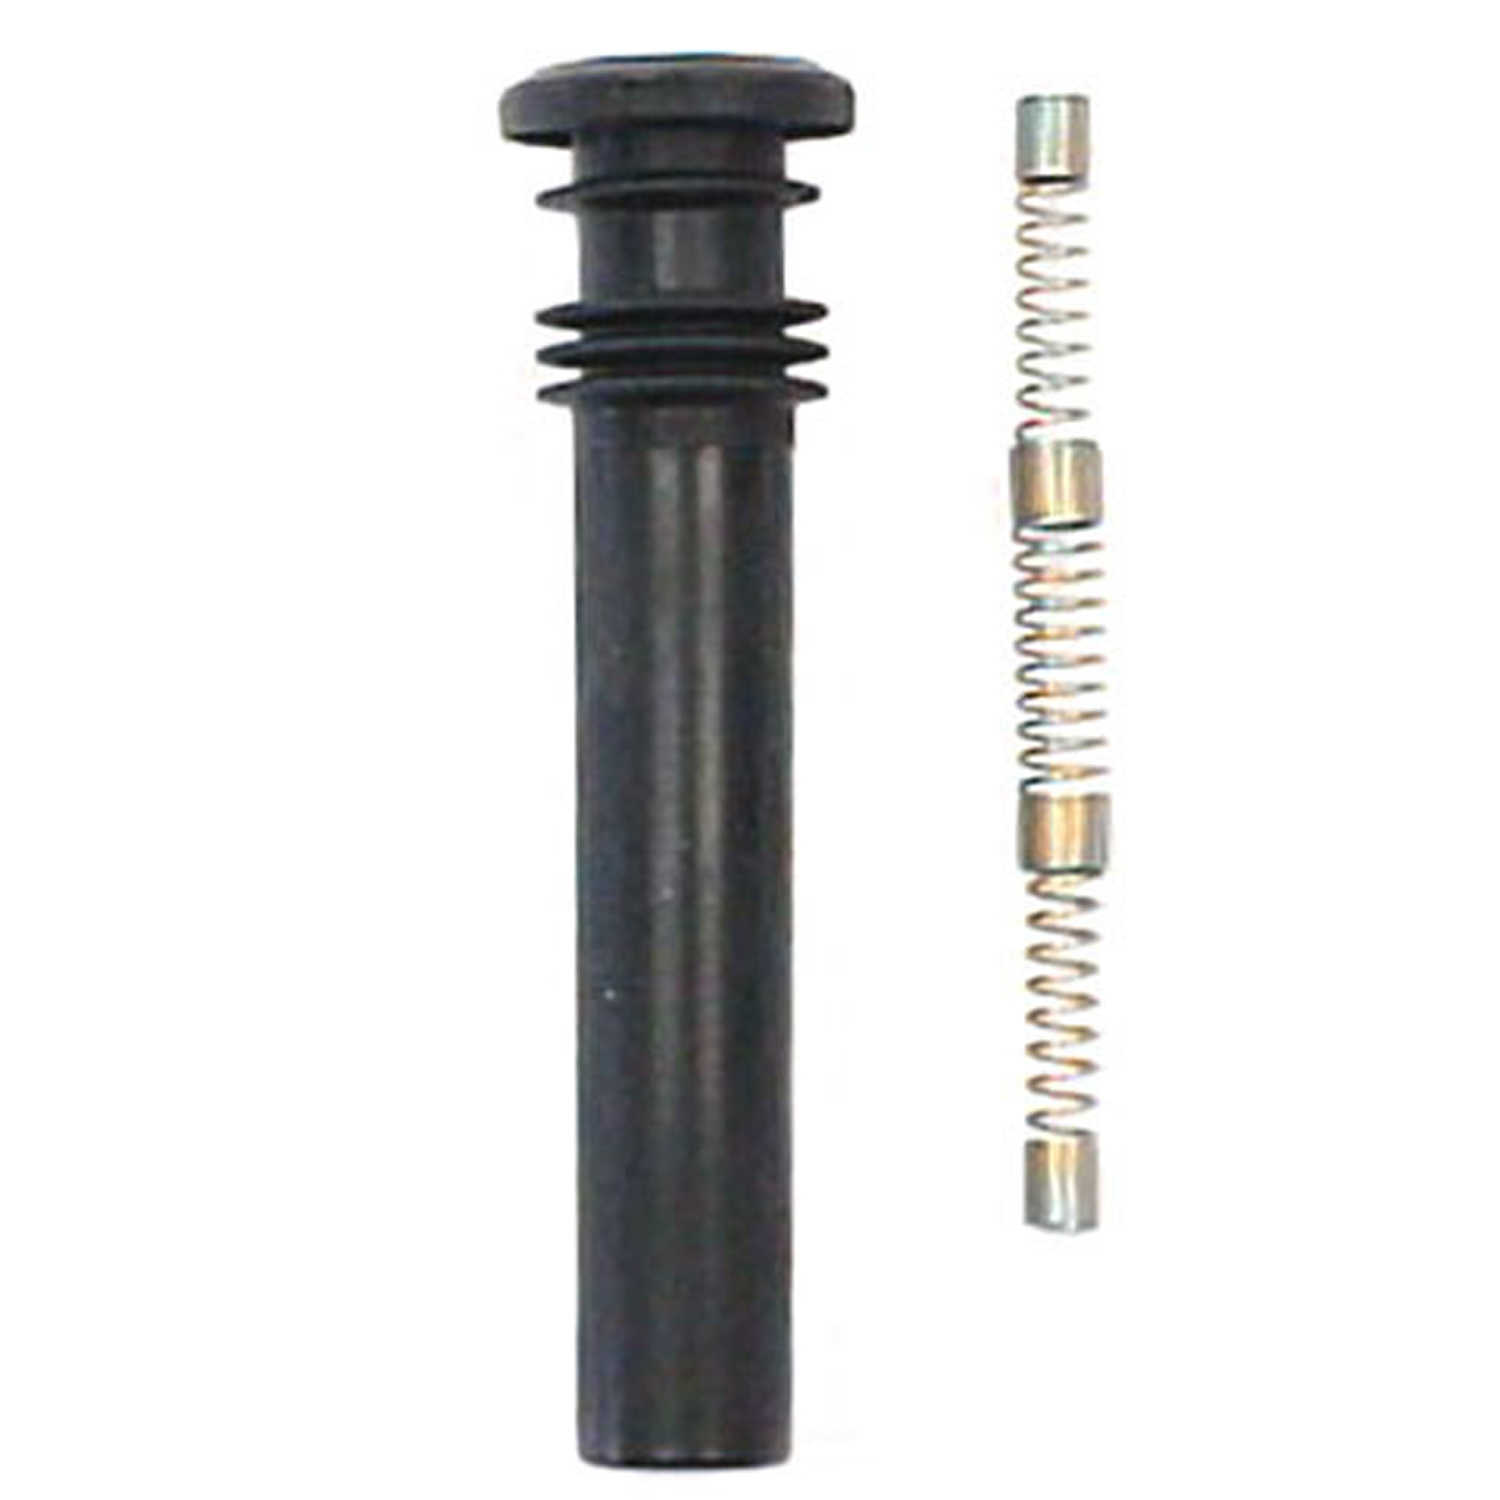 DENSO - Direct Ignition Coil Boot Kit - 8 Boots - NDE 671-8157